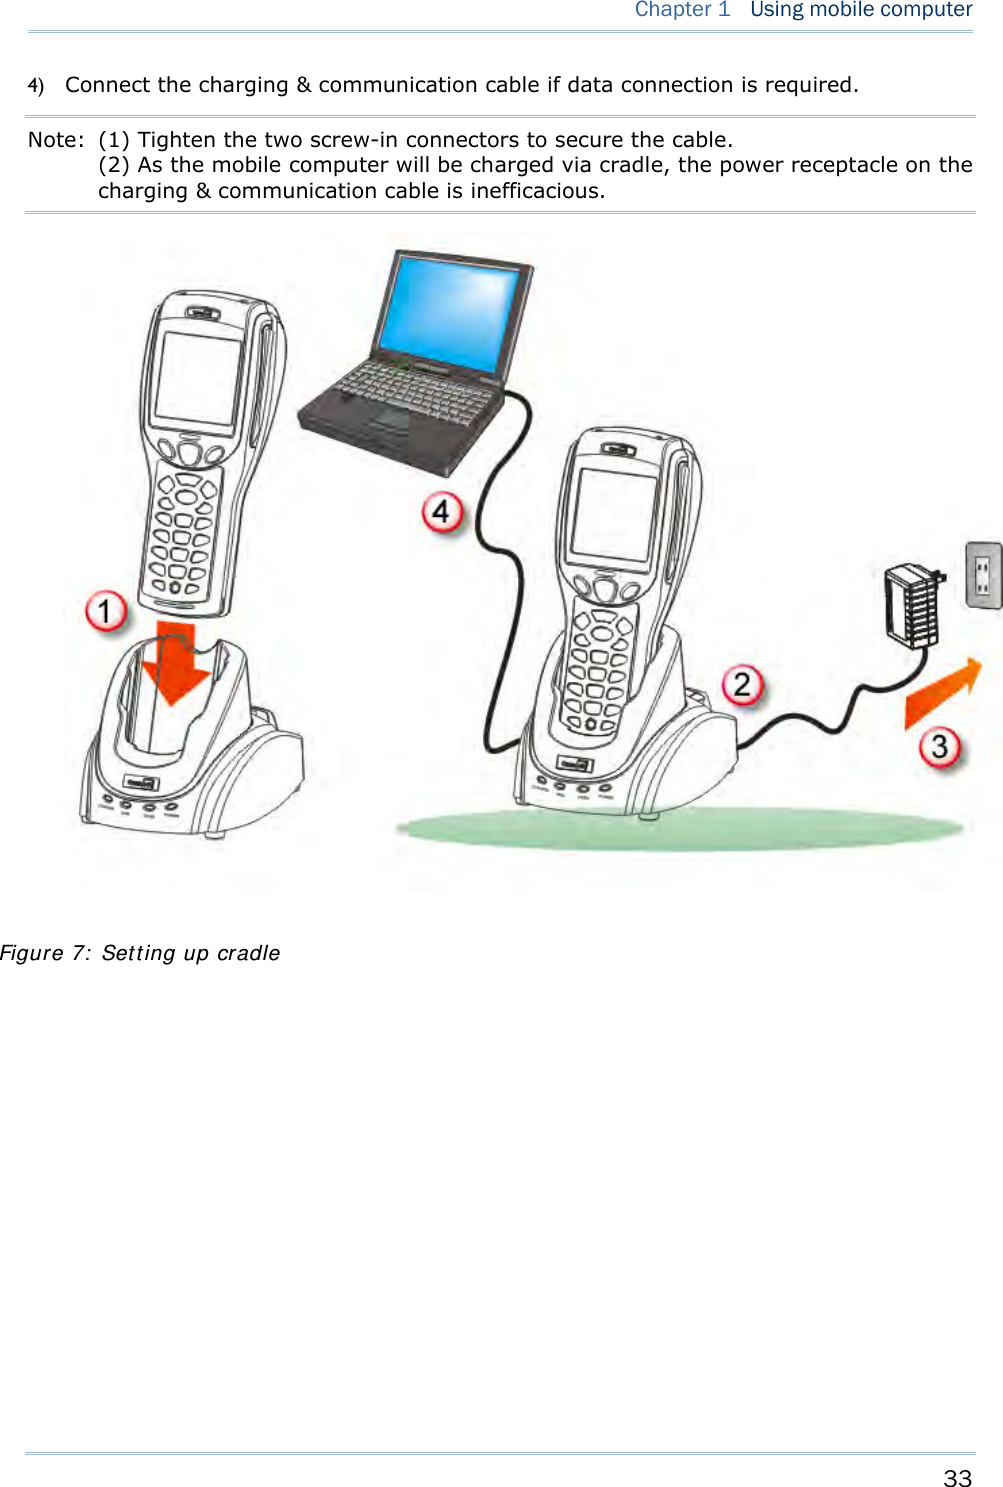     33   Chapter 1   Using mobile computer  4) Connect the charging &amp; communication cable if data connection is required. Note:  (1) Tighten the two screw-in connectors to secure the cable. (2) As the mobile computer will be charged via cradle, the power receptacle on the charging &amp; communication cable is inefficacious.     Figure 7:  Set t ing up cradle 